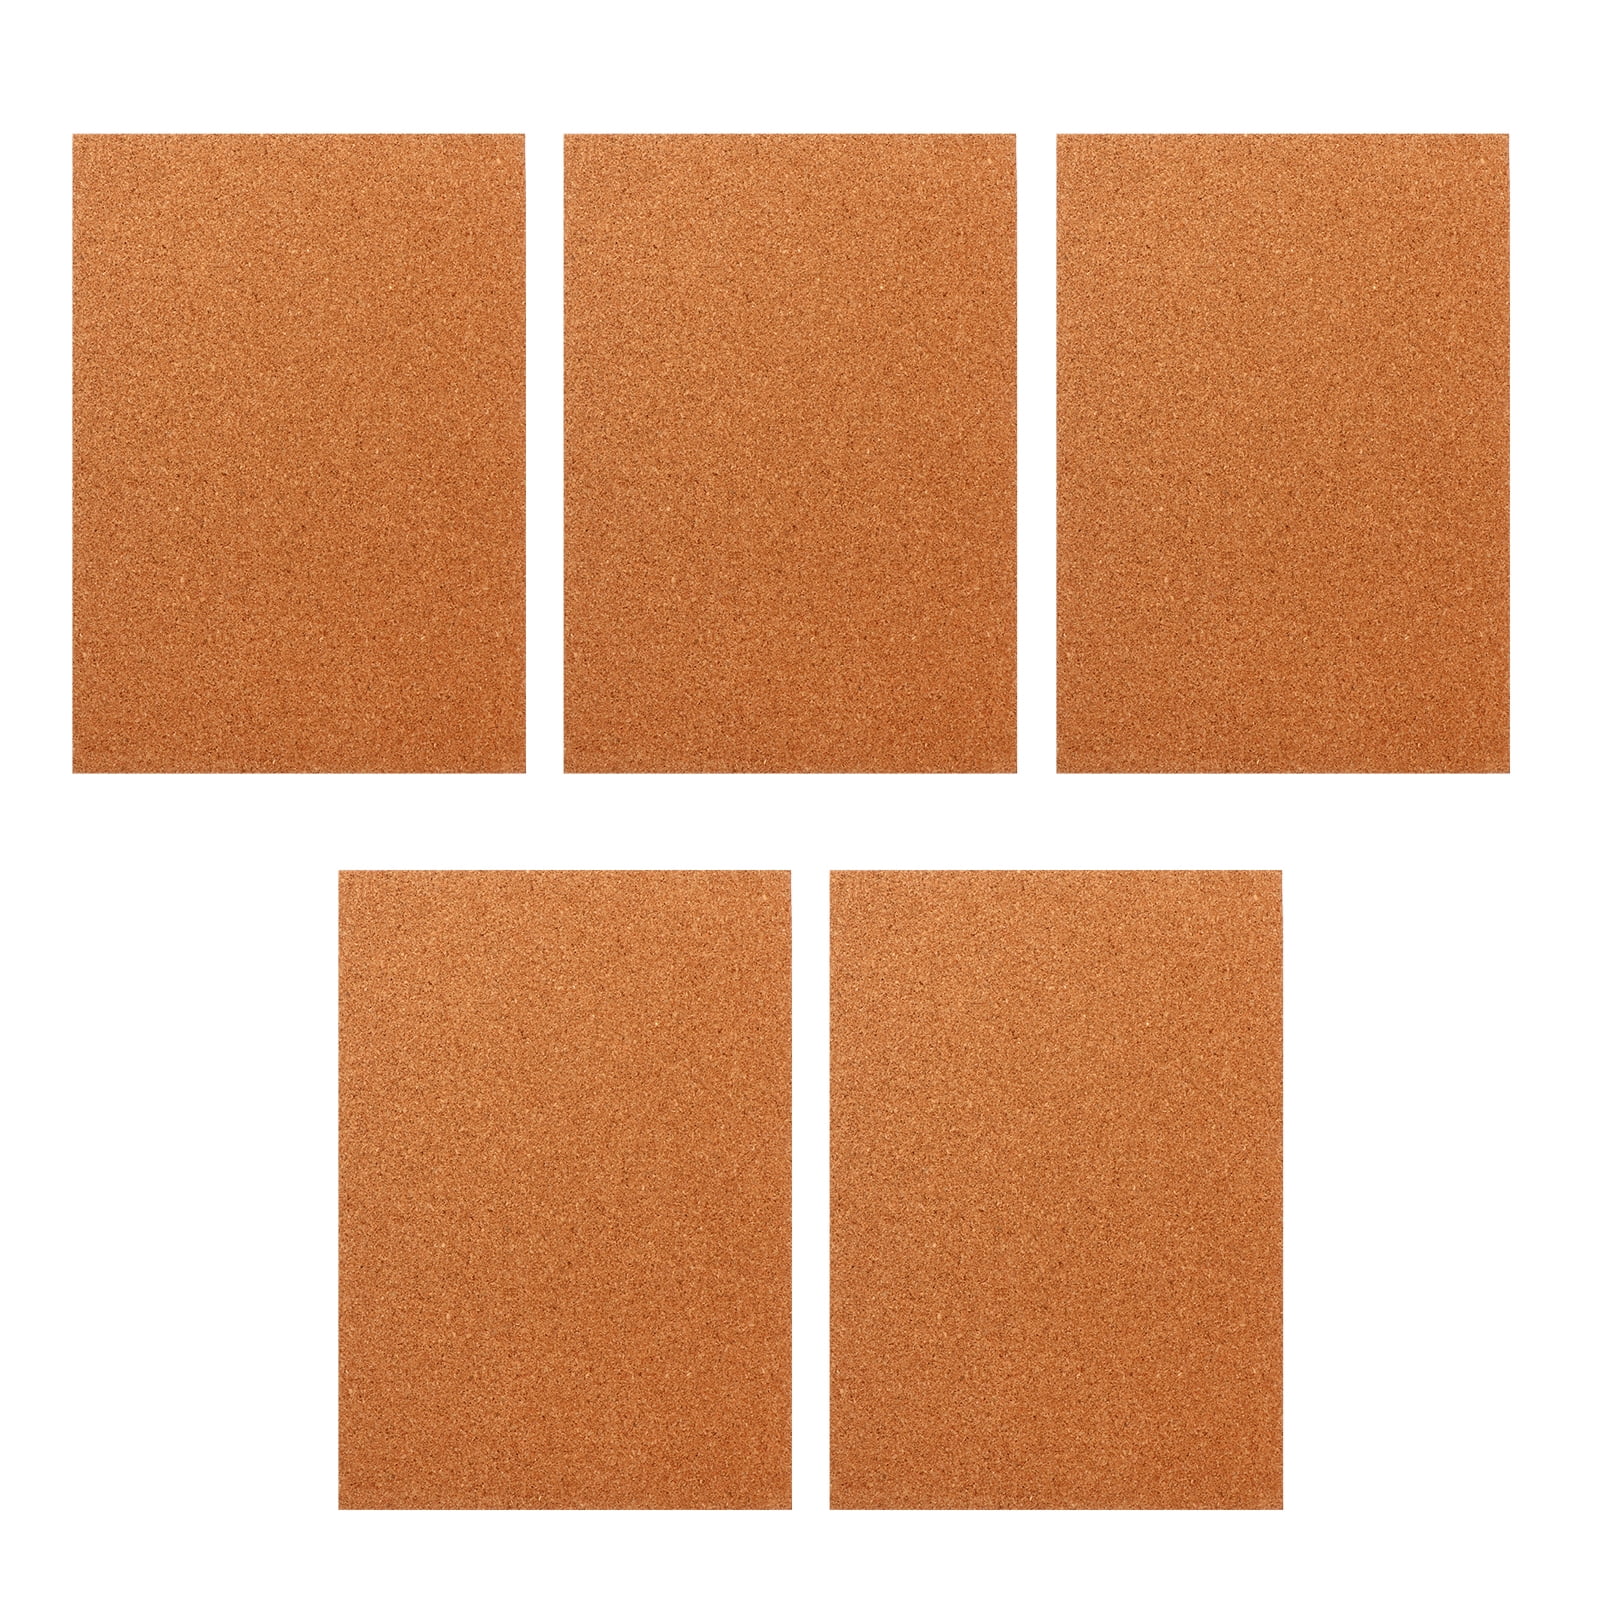 6 Pack Adhesive Cork Board Bulletin Bar Strips for Walls, 12x1.5 Pin  Boards with Tape for Office Supplies, Reminders, Notes 